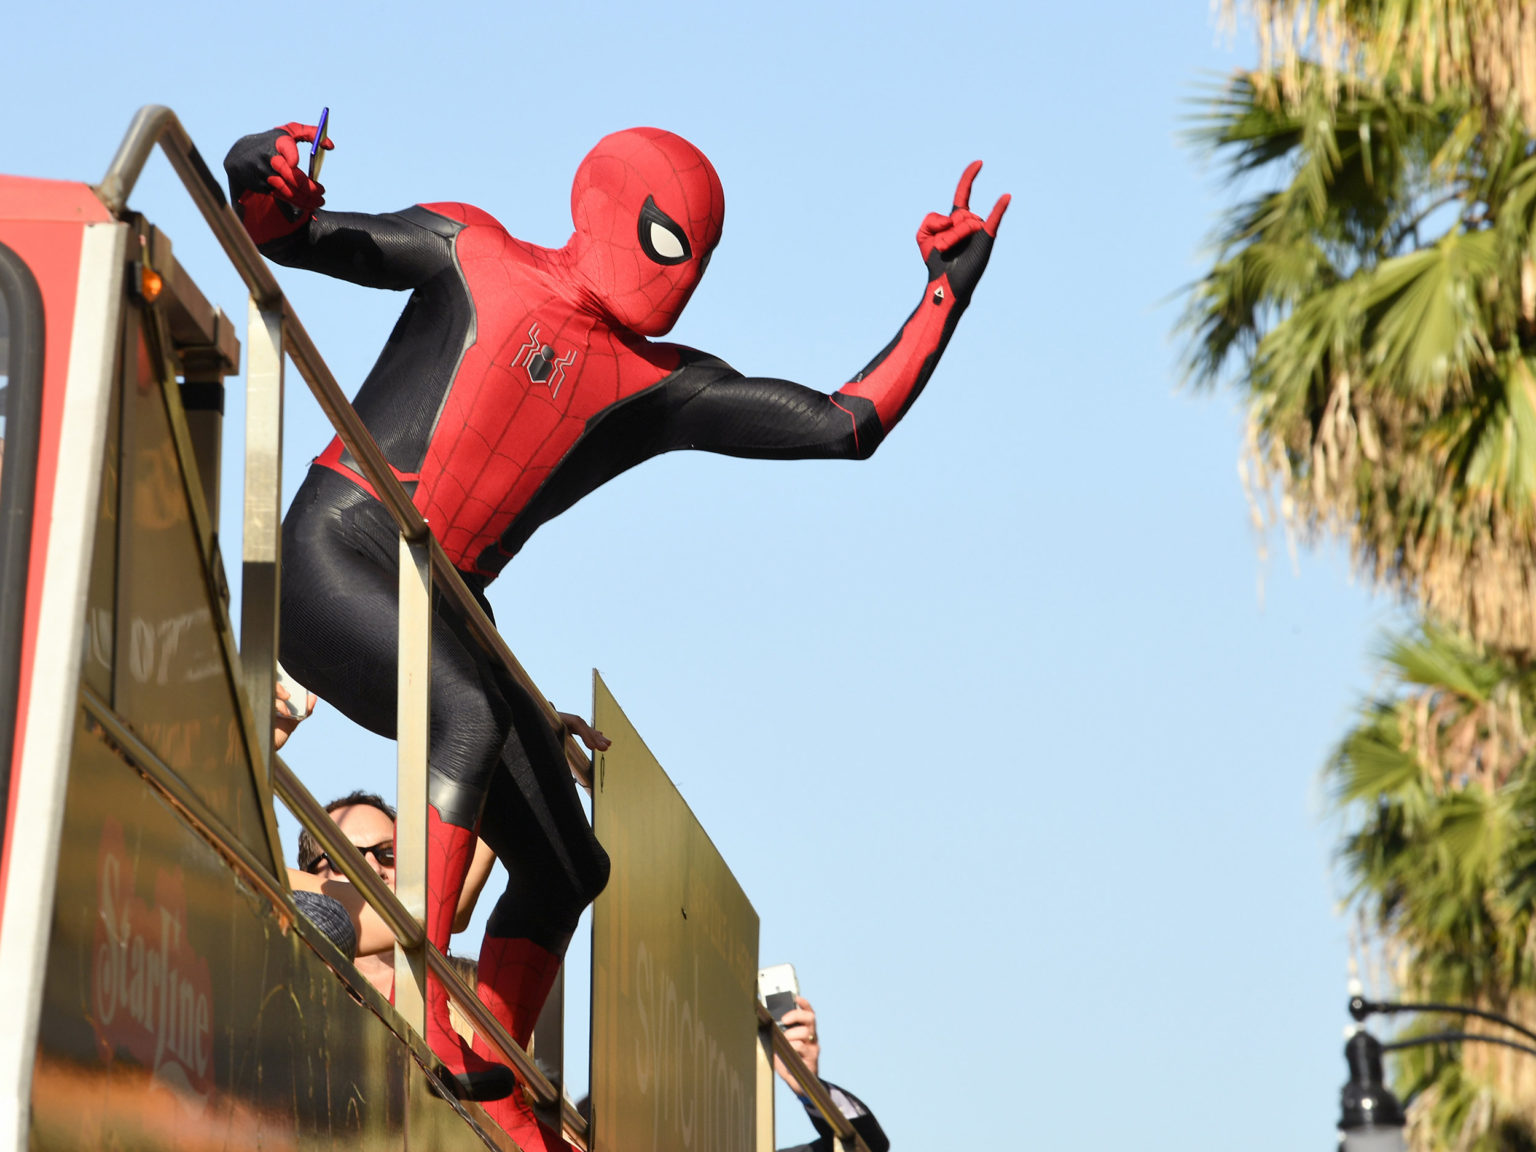 Spider-man performers are seen at the premiere of Sony Pictures' "Spider-Man Far From Home" at TCL Chinese Theatre on June 26, 2019 in Hollywood, California.